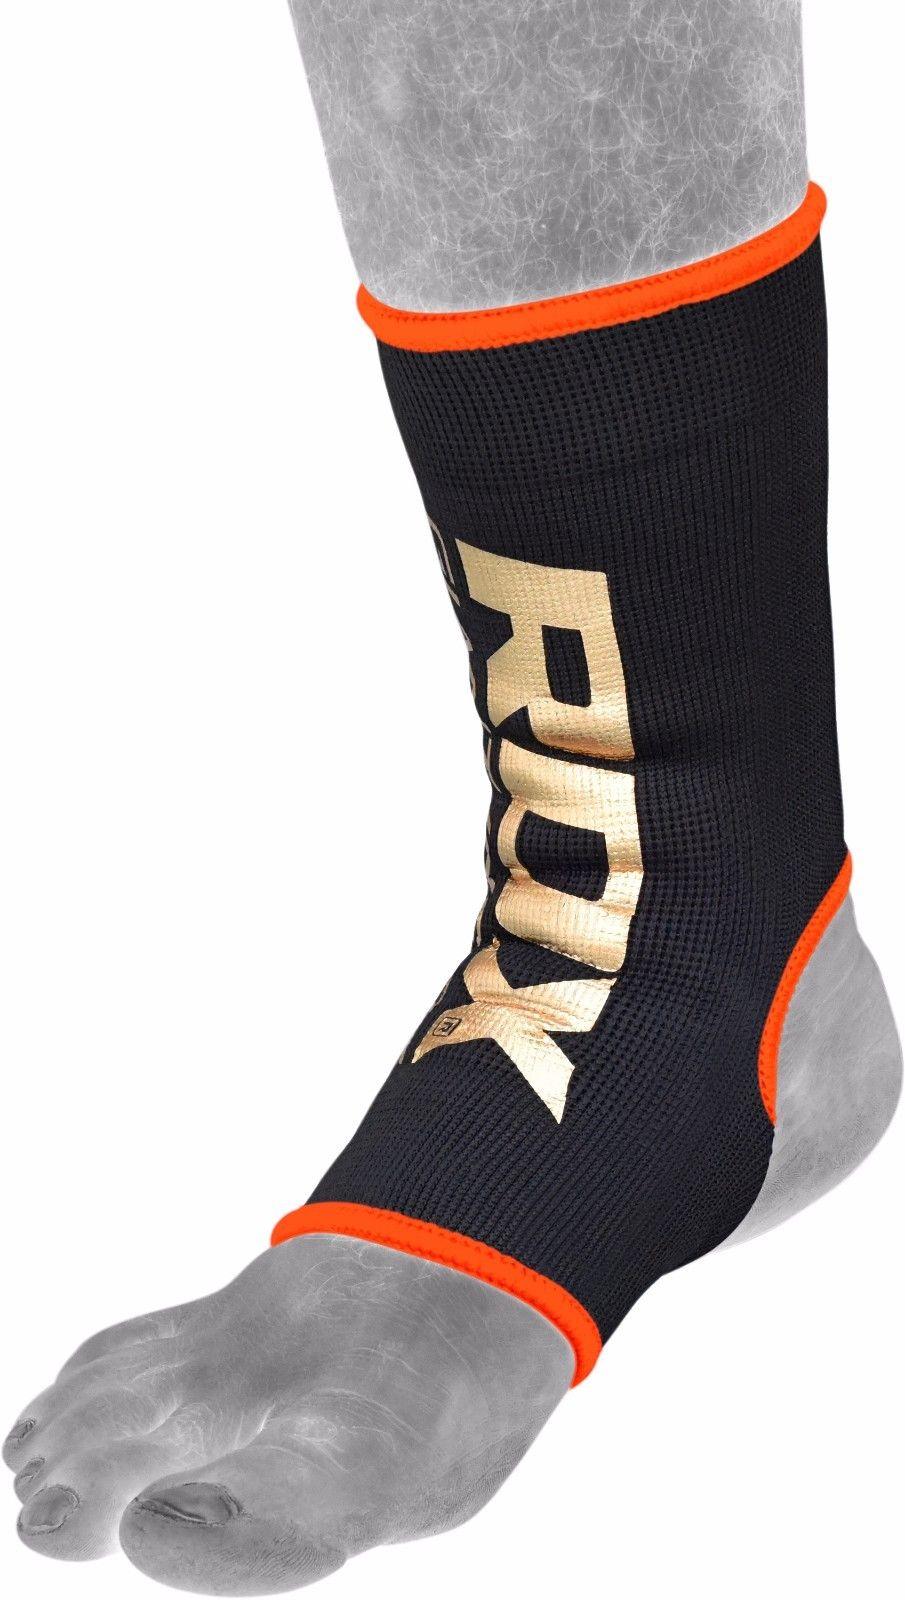 RDX AO Ankle Support - Fitness Health 